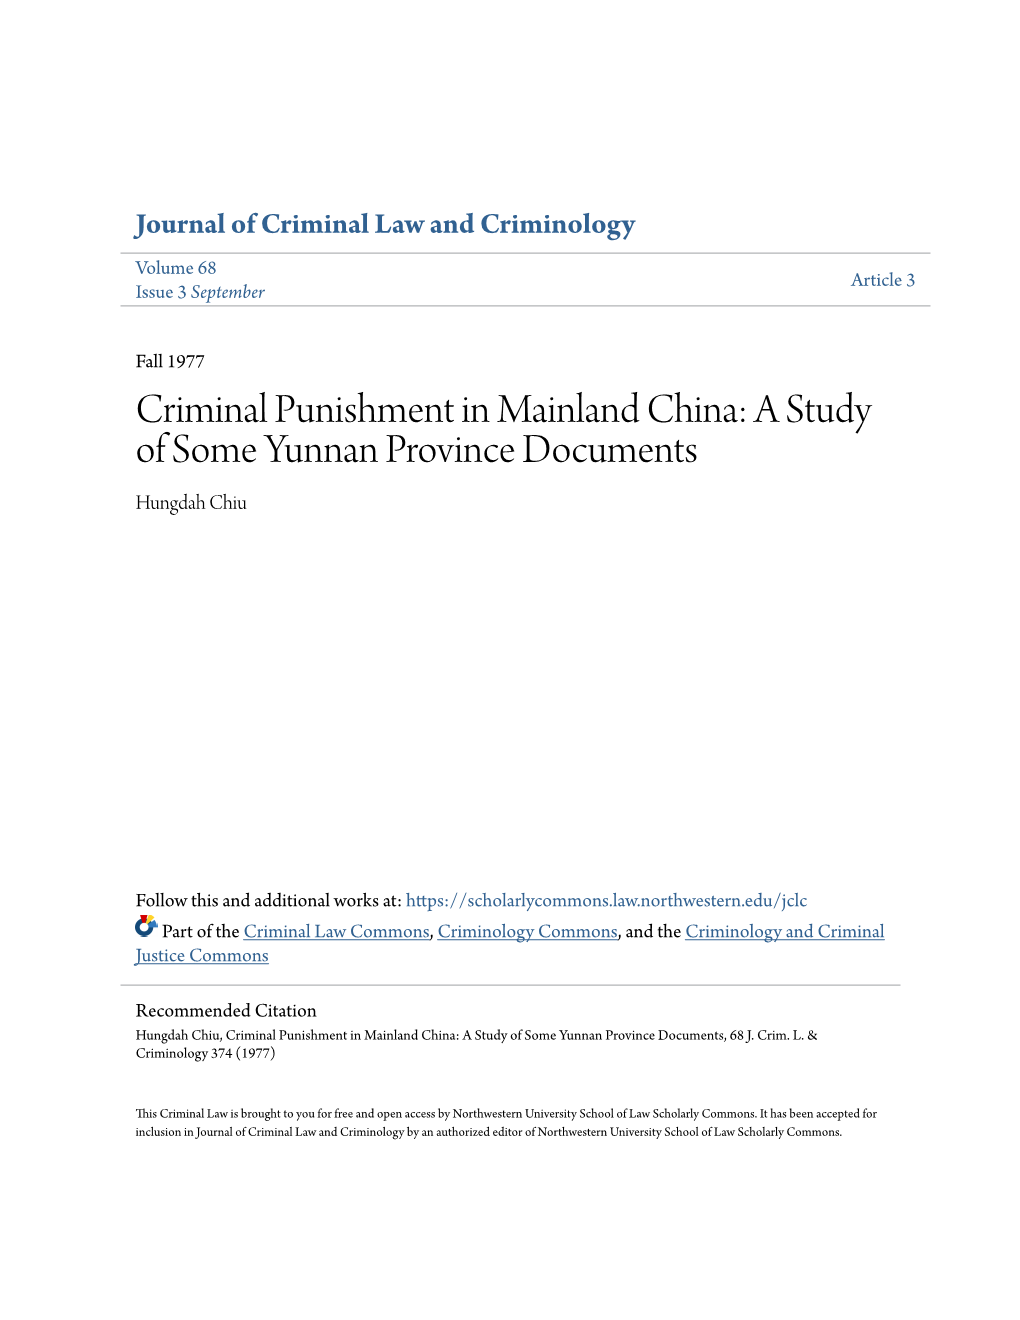 Criminal Punishment in Mainland China: a Study of Some Yunnan Province Documents Hungdah Chiu